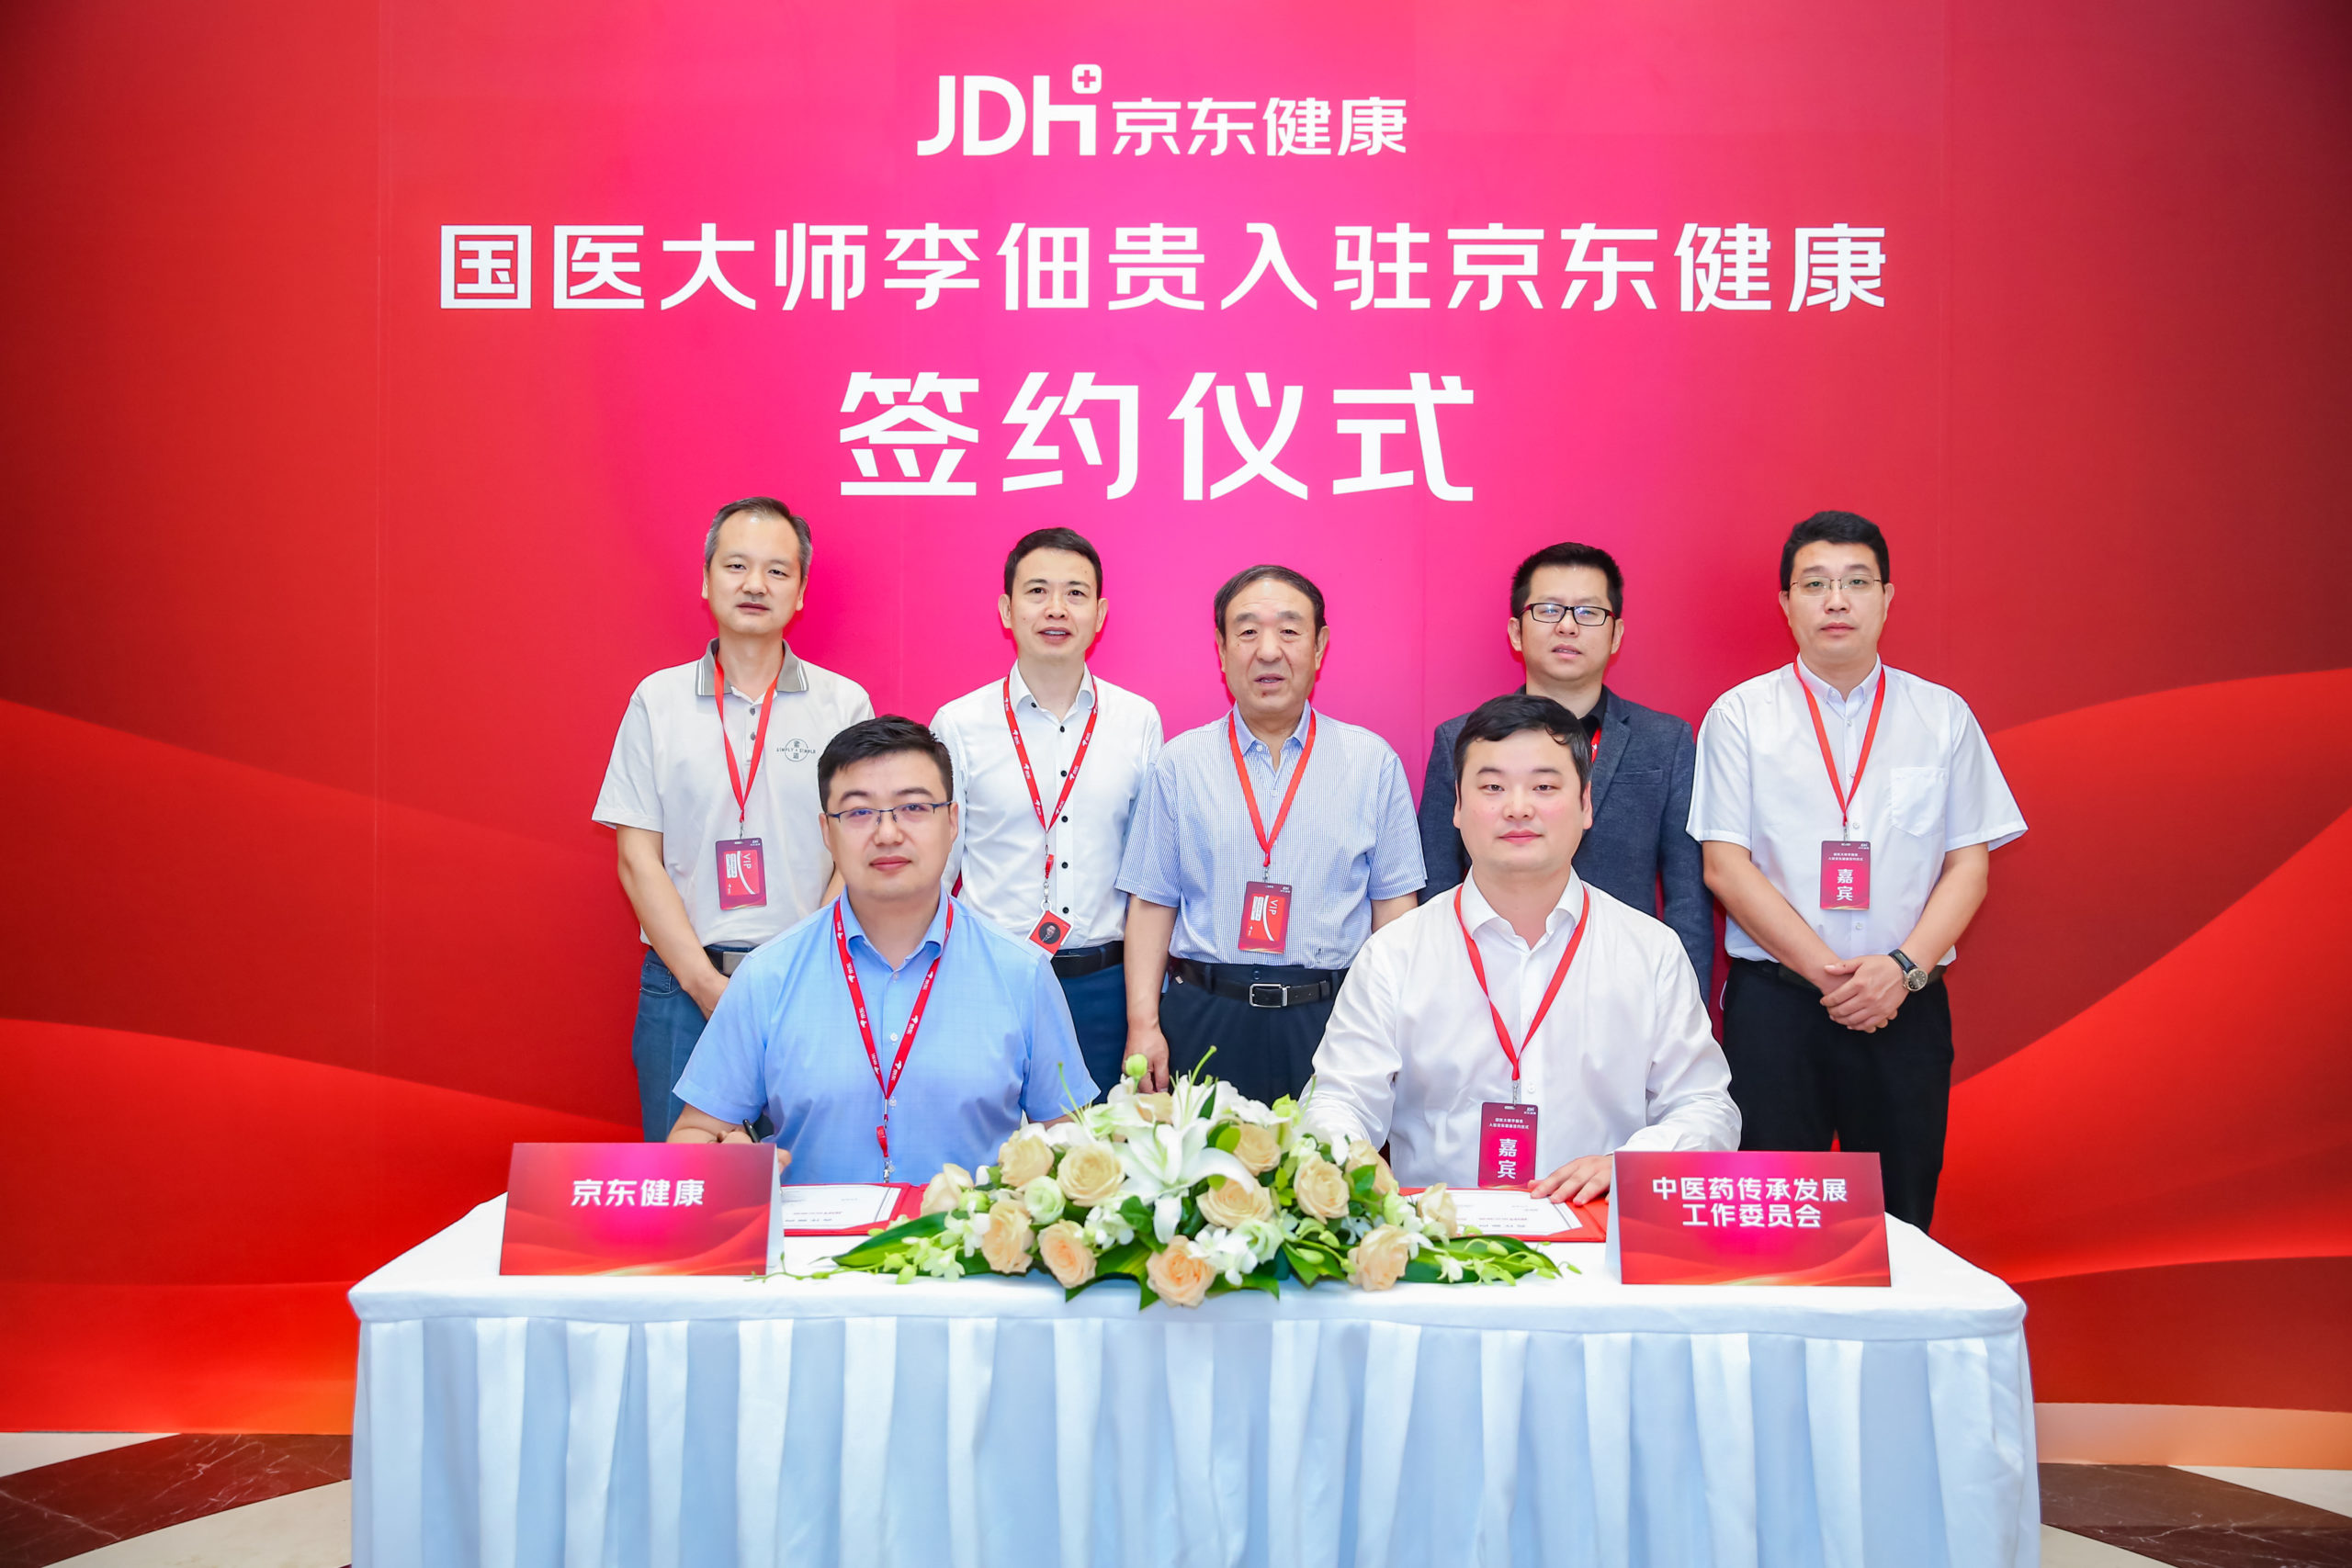 Dr. Li and Lijun Xin, CEO of JD Health, attended today’s signing ceremony